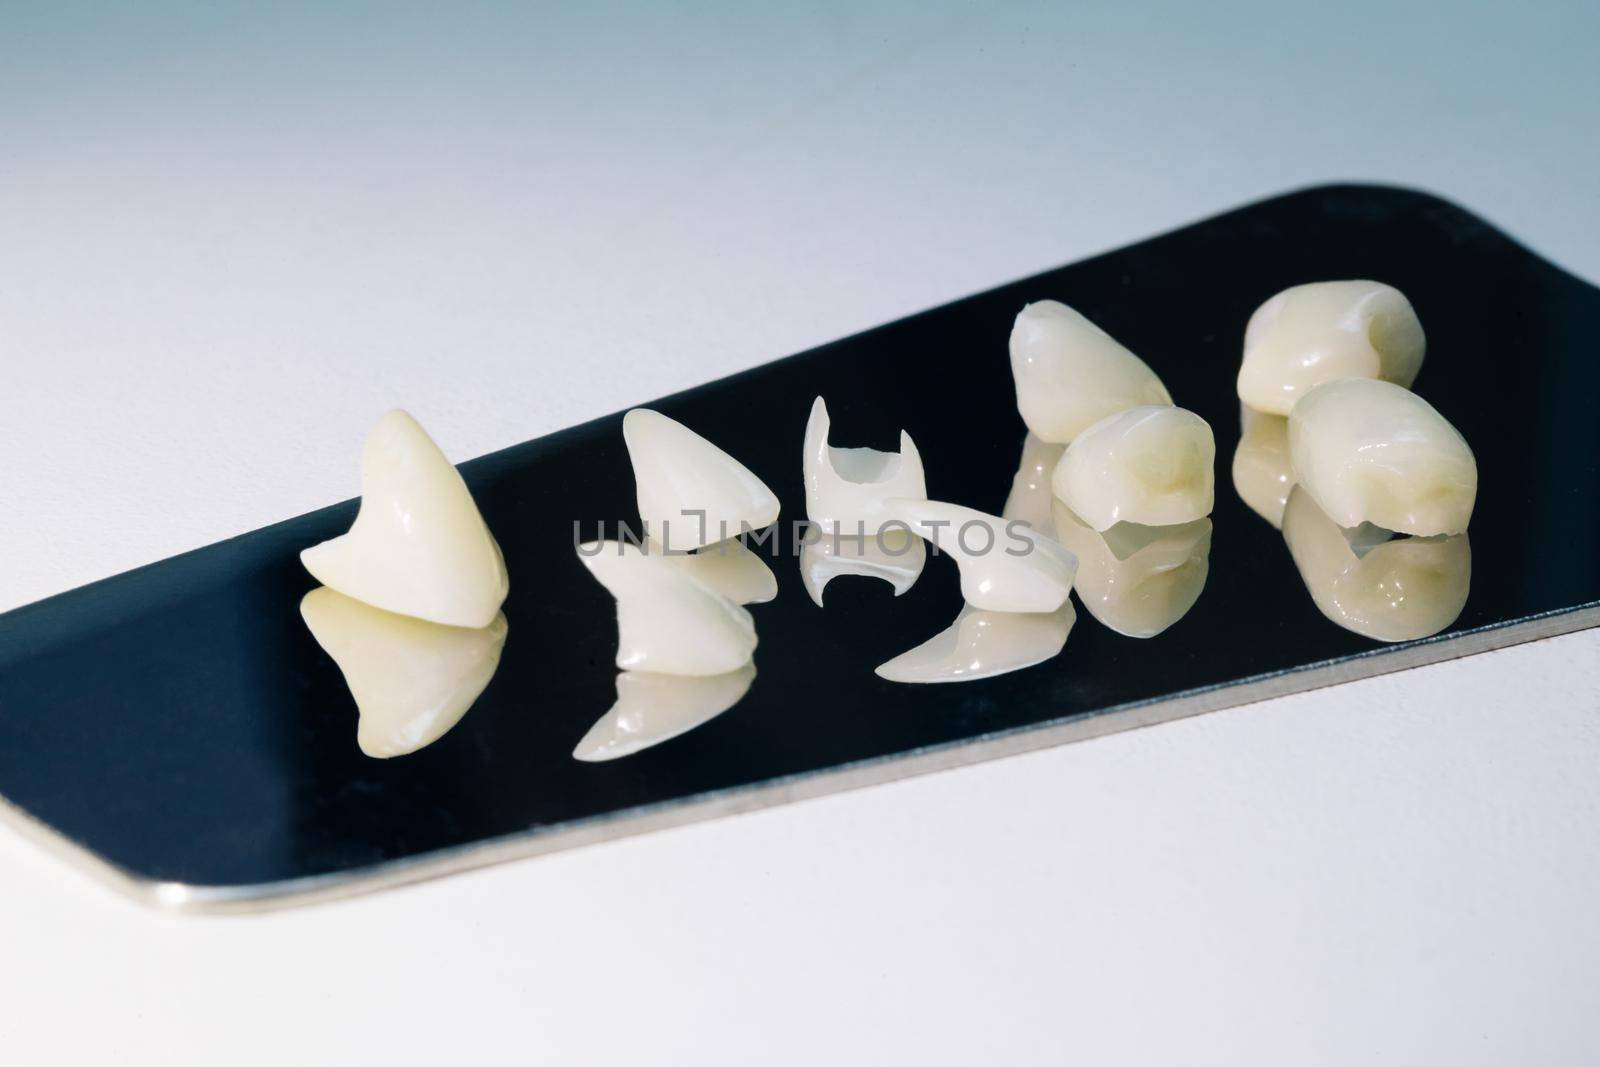 Ceramic tooth with a totally wite background. Ceramic teeth with the veneers. Free metal ceramic teeth.